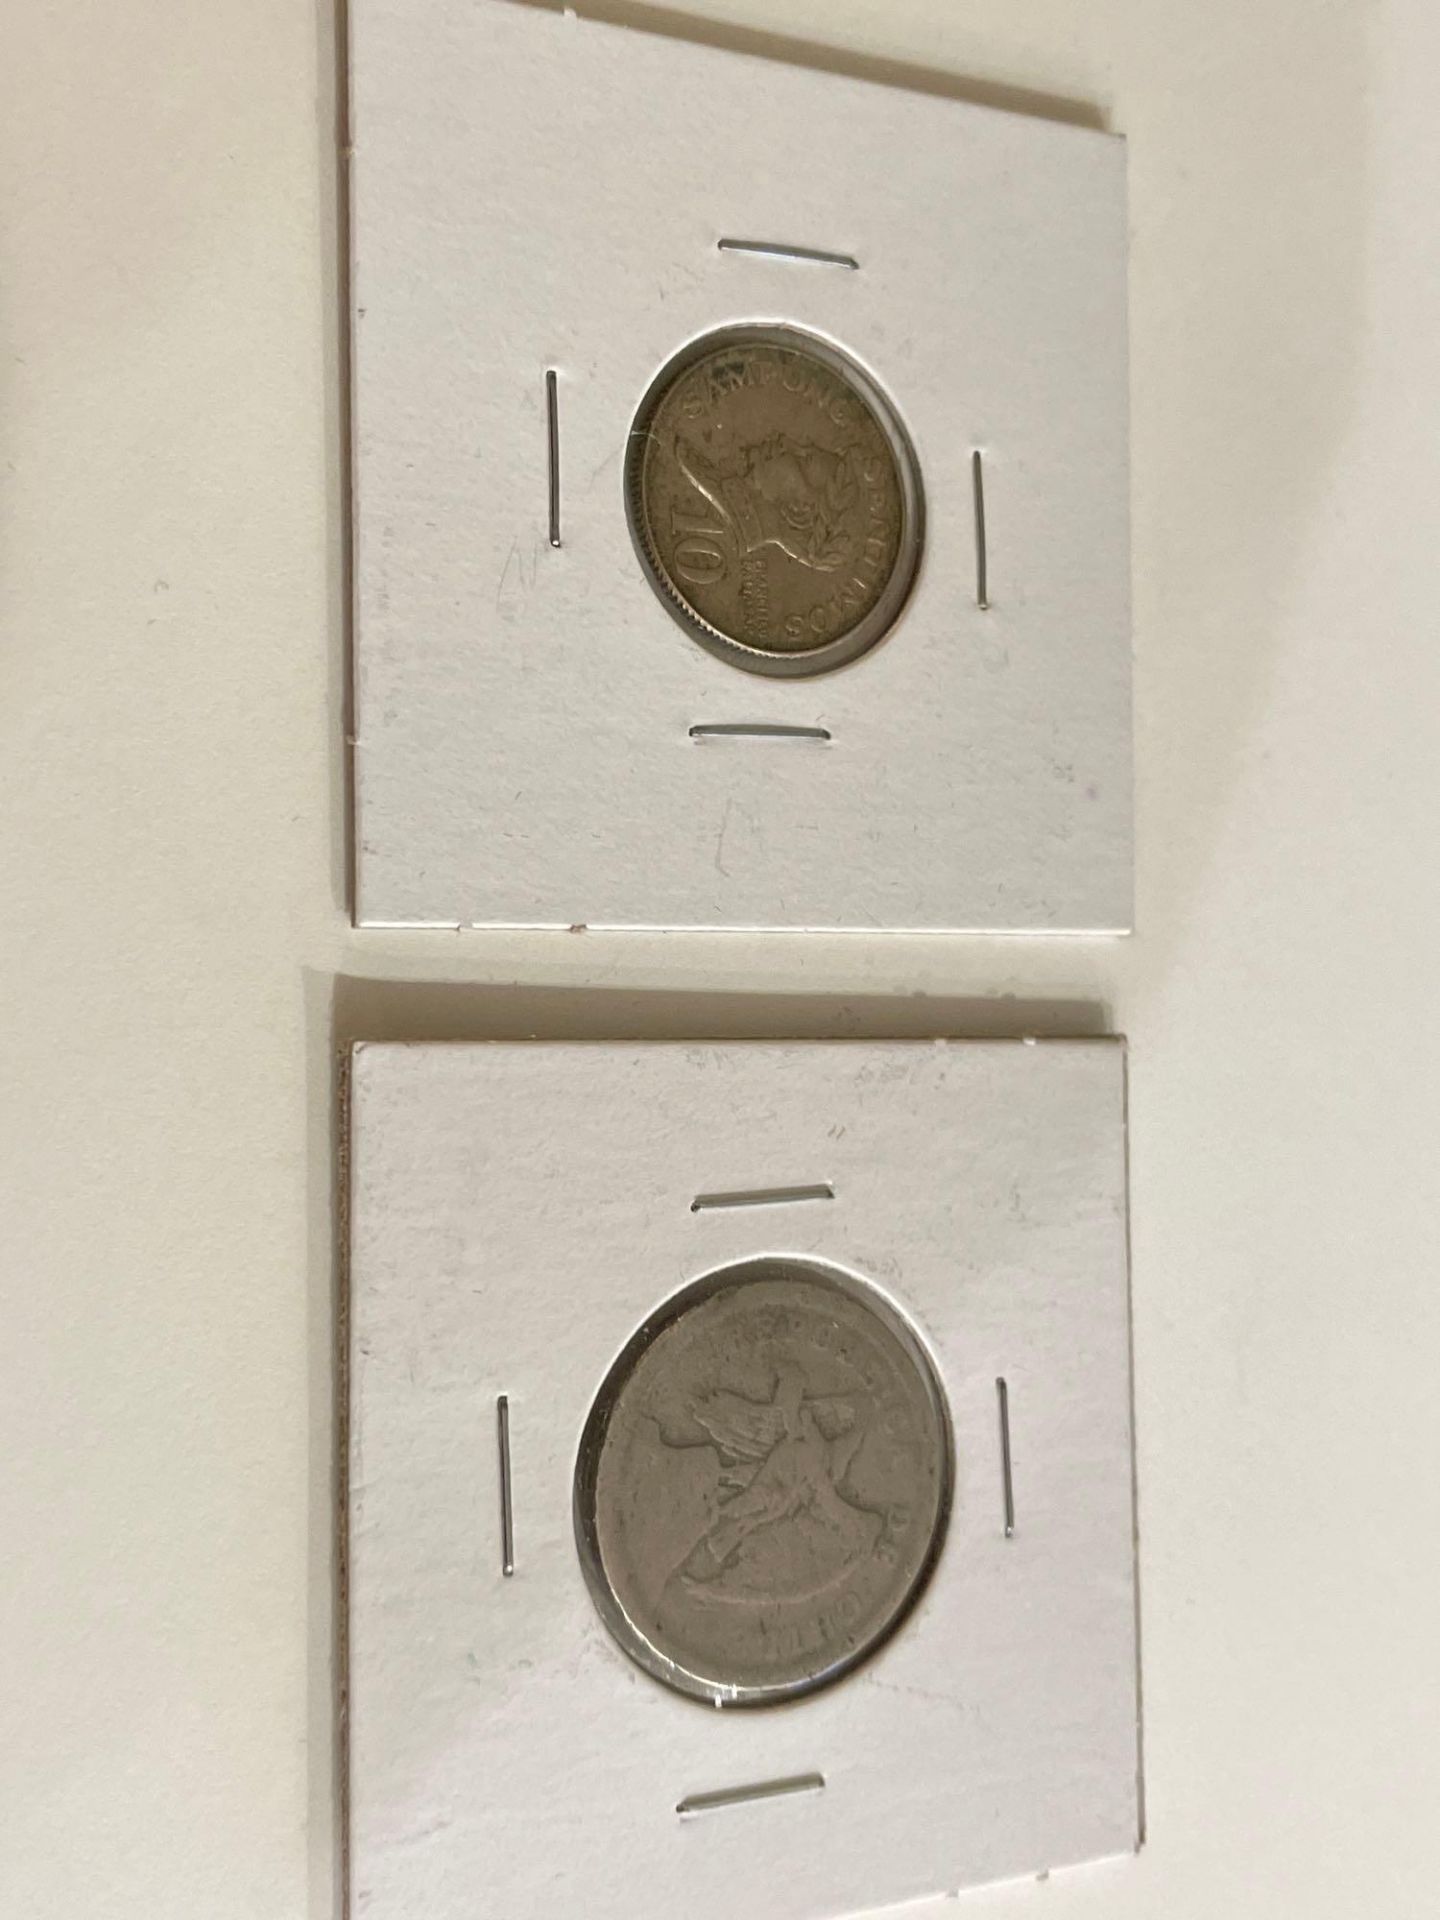 Foreign Coins - Image 3 of 11